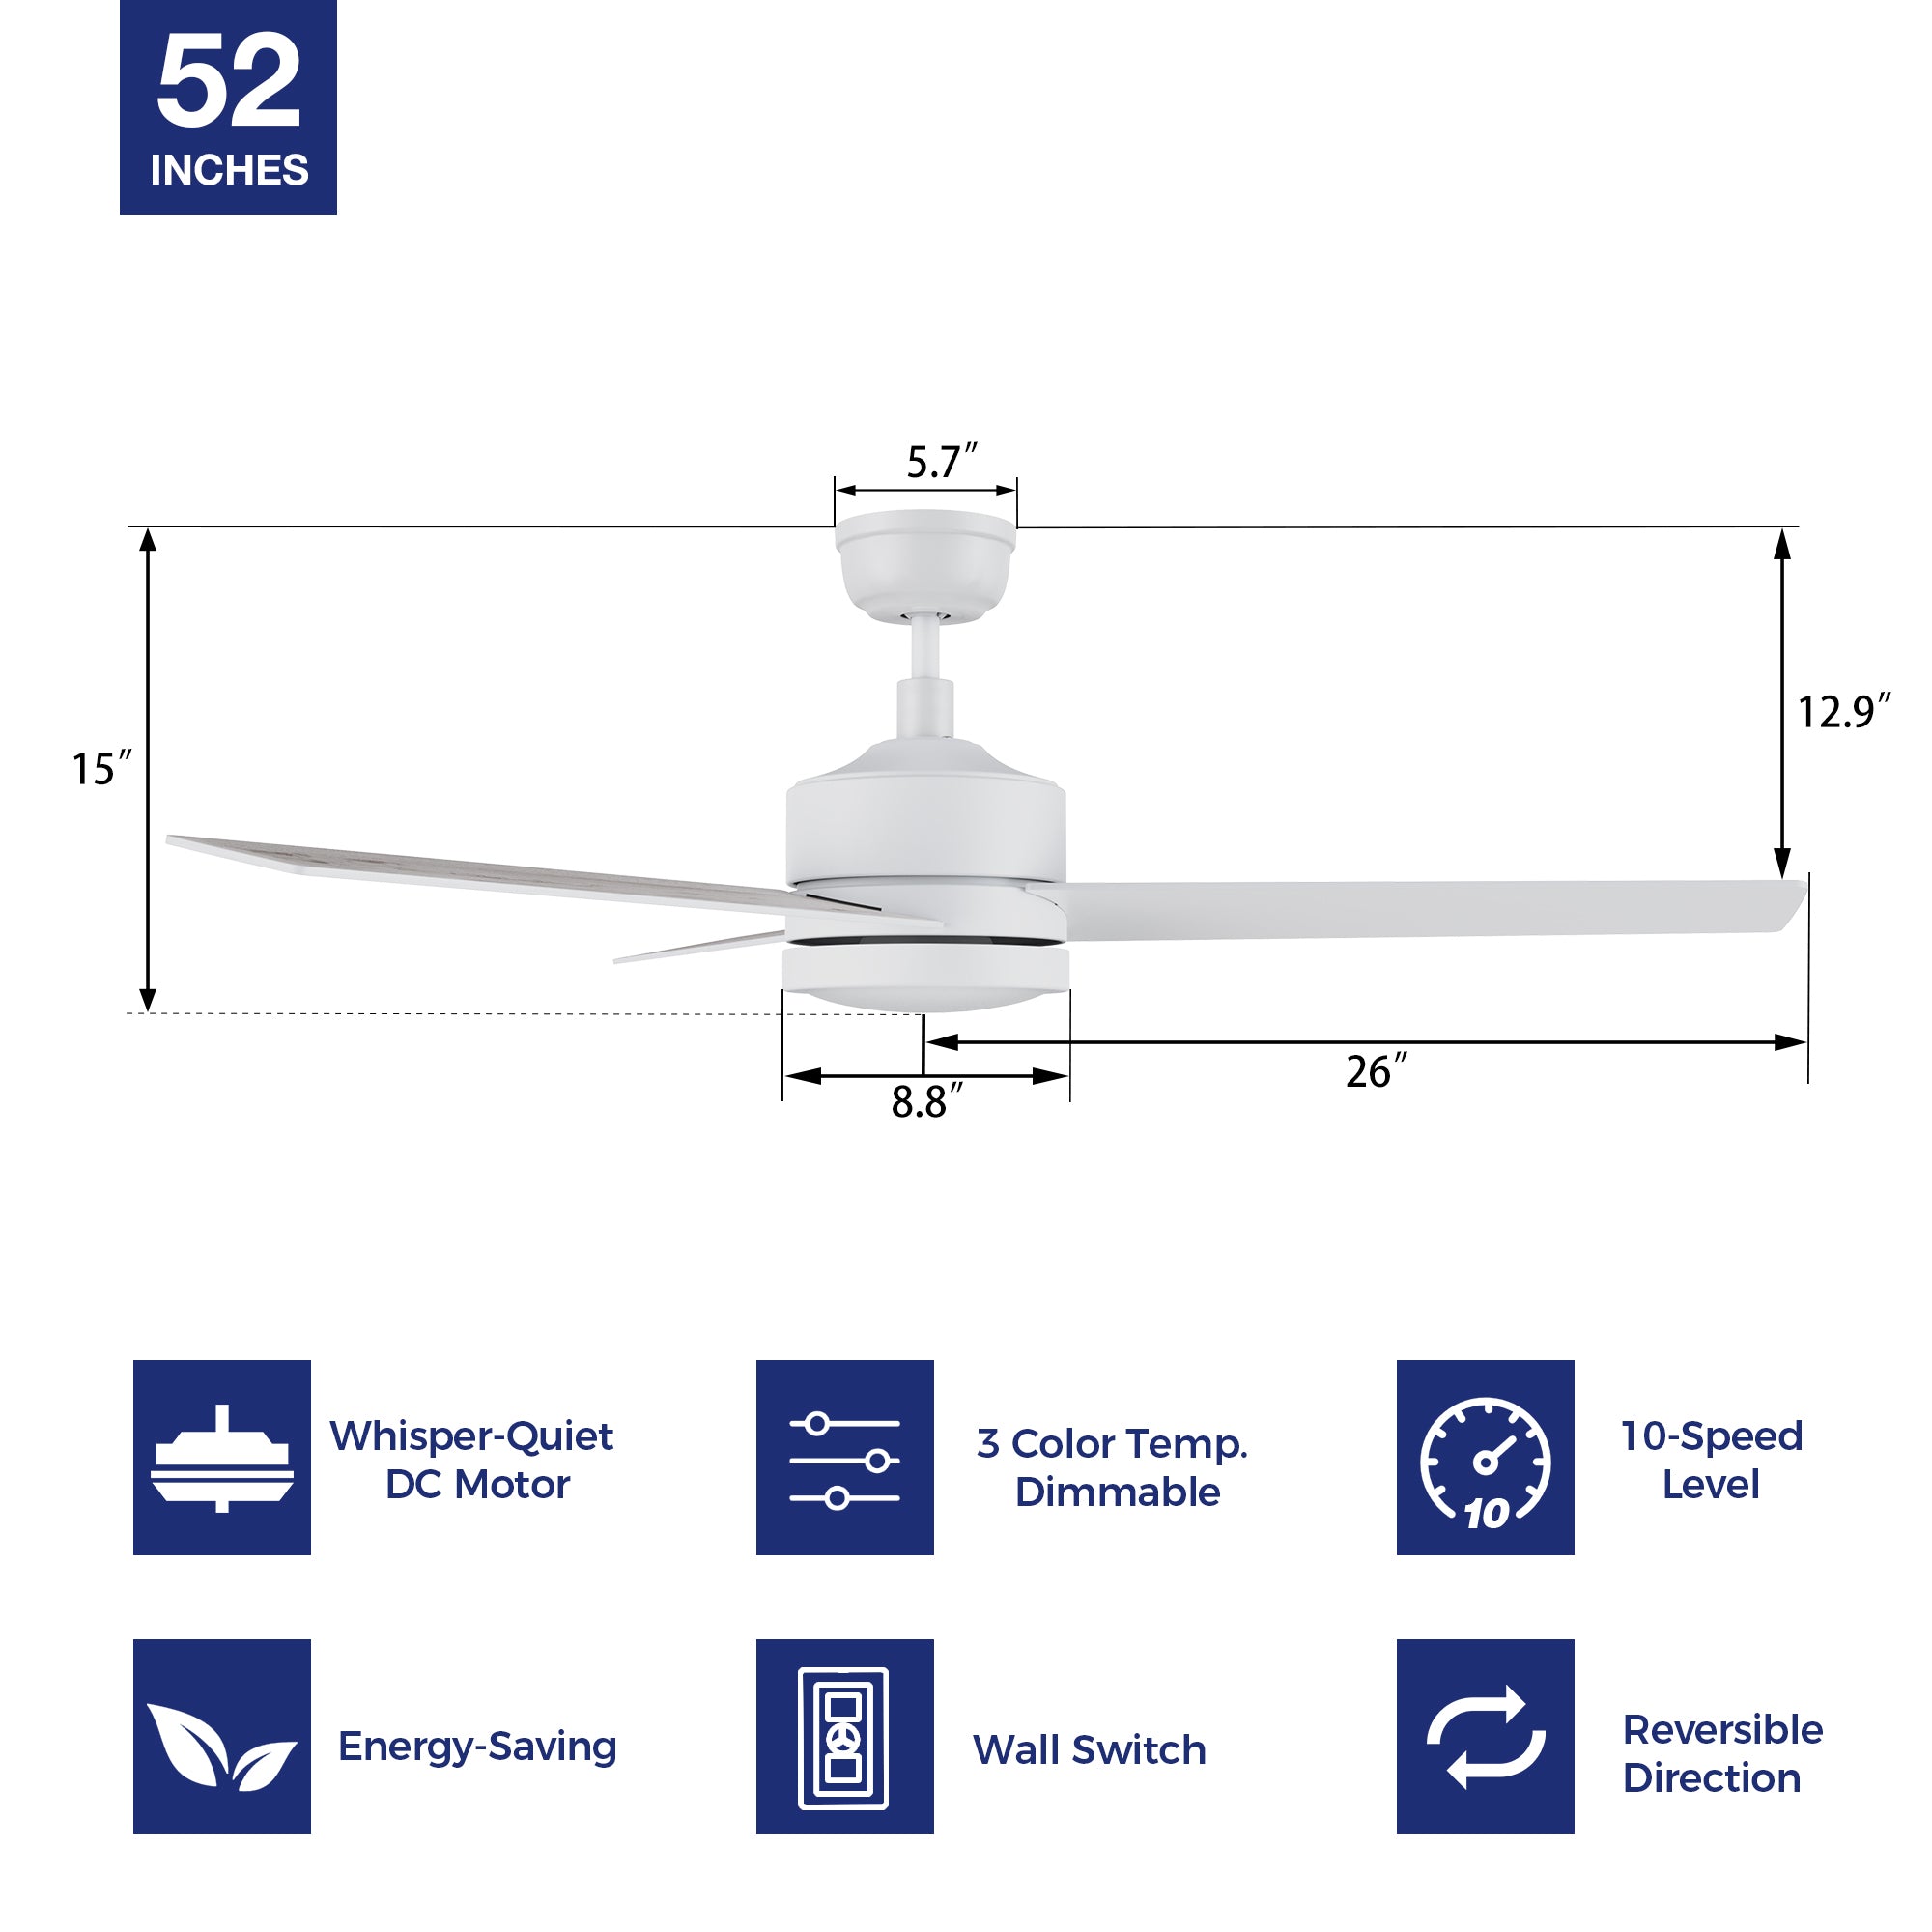 Dimensions and key features of the 52-inch modern ceiling fan, showcasing size and functional details including wall switch, easy installation, 10-speed DC motor,durable LED light kit, dimmable LED light kit, energy efficient.